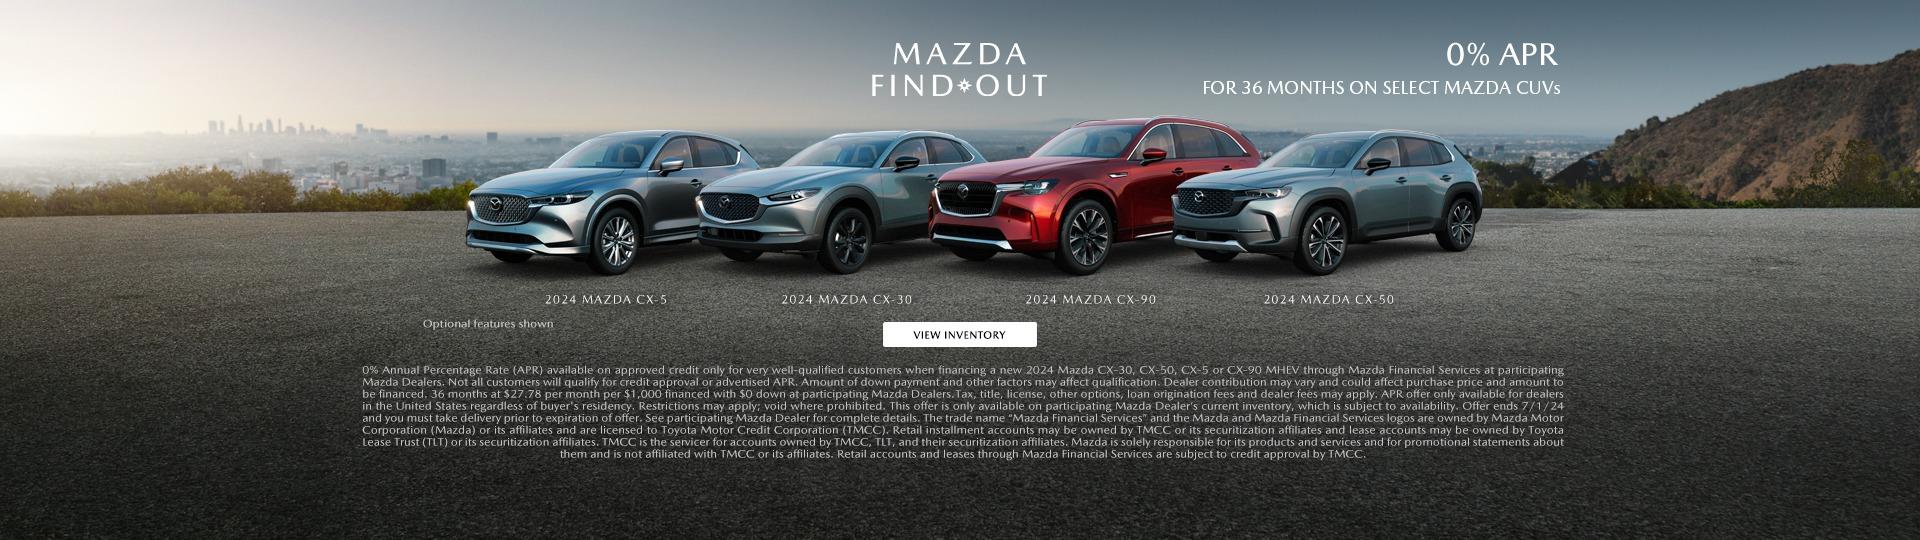 Mazda Find Out